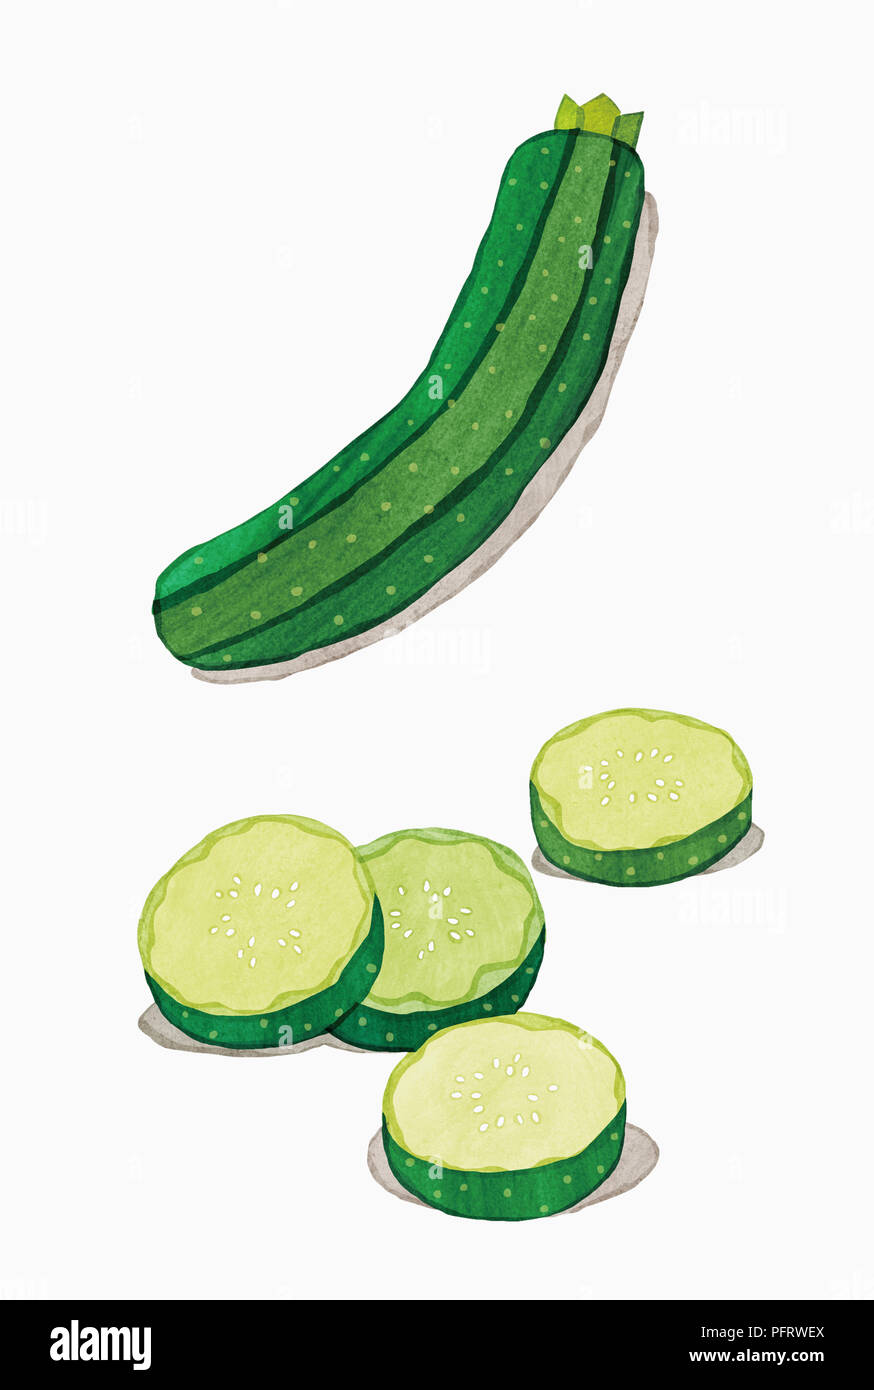 Illustration, Courgette Stock Photo